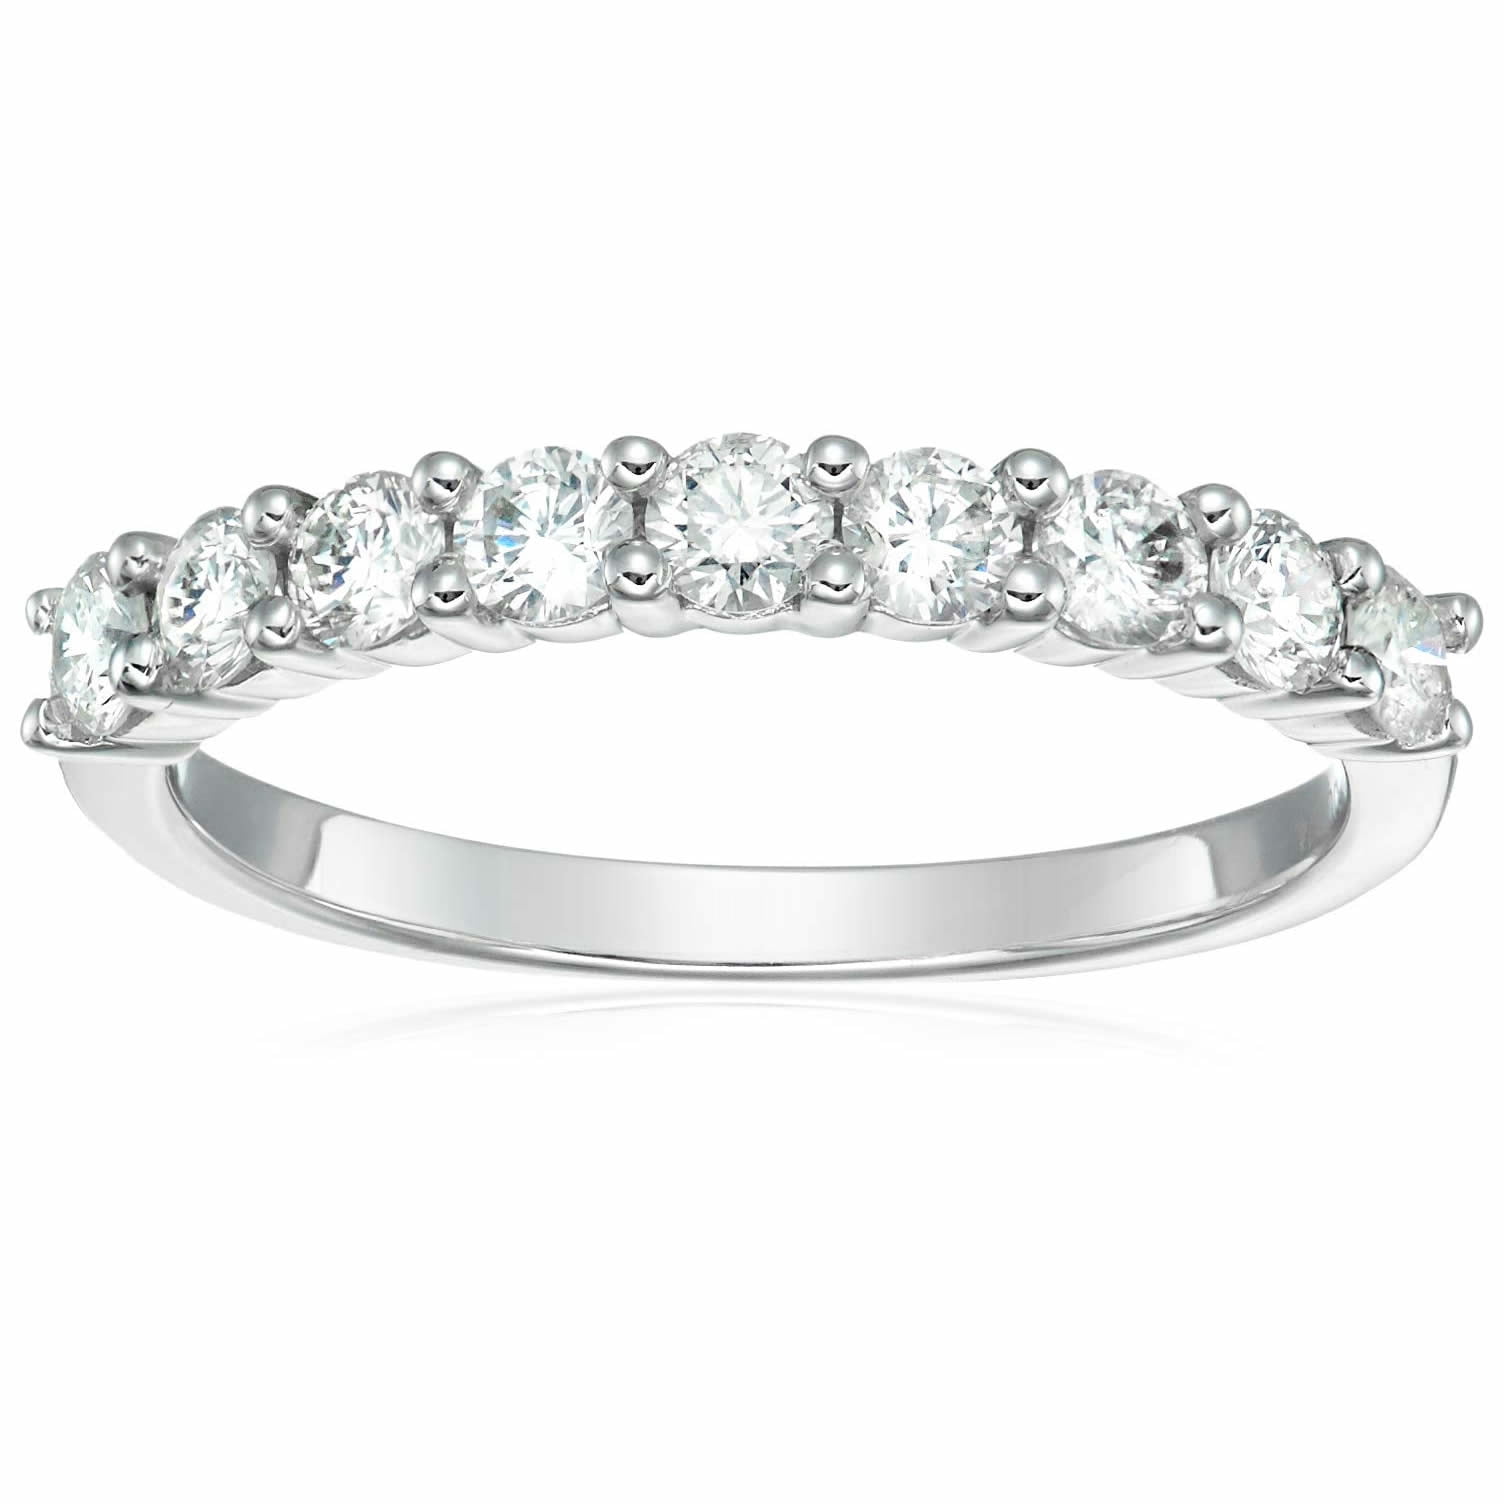 Vir Jewels 3/4 CTTW Certified I1-I2 Diamond Wedding Band in 14K White Gold  9 Stones Round Size 9 Female Adult